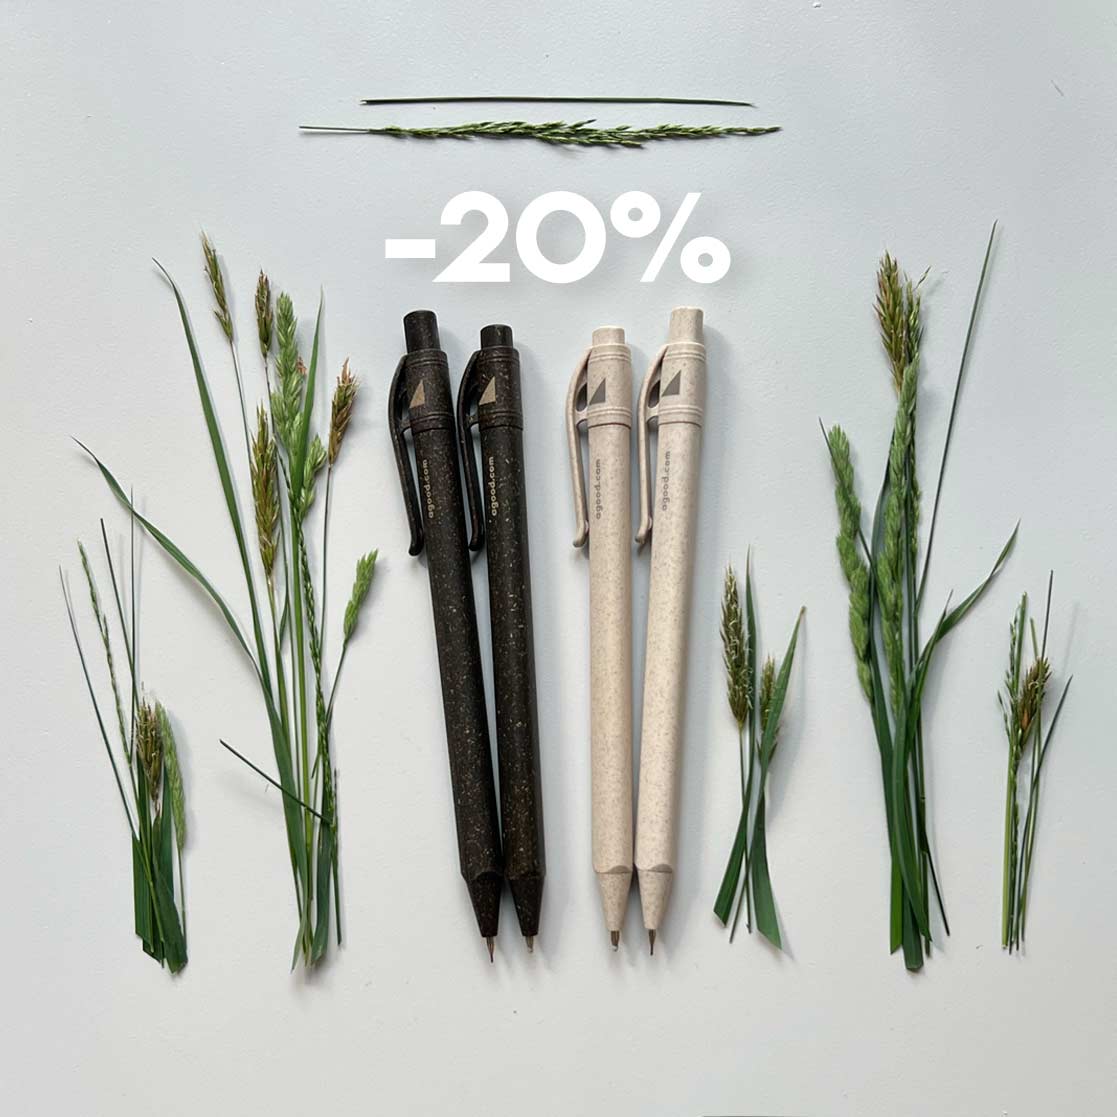 Pens made from meadow grass